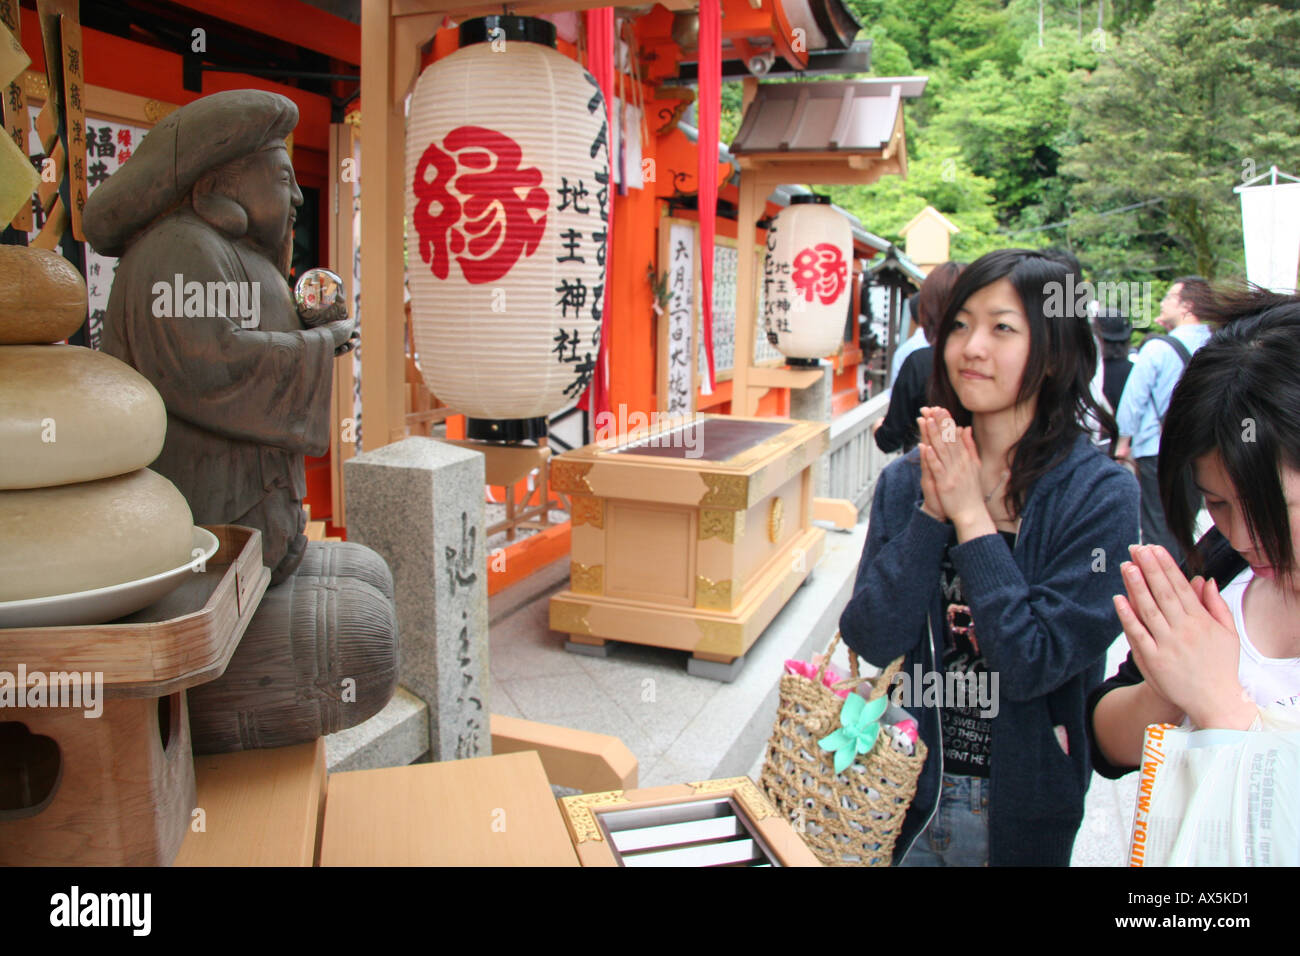 Women praying at a shinto shrine in Kyoto, Japan Stock Photo